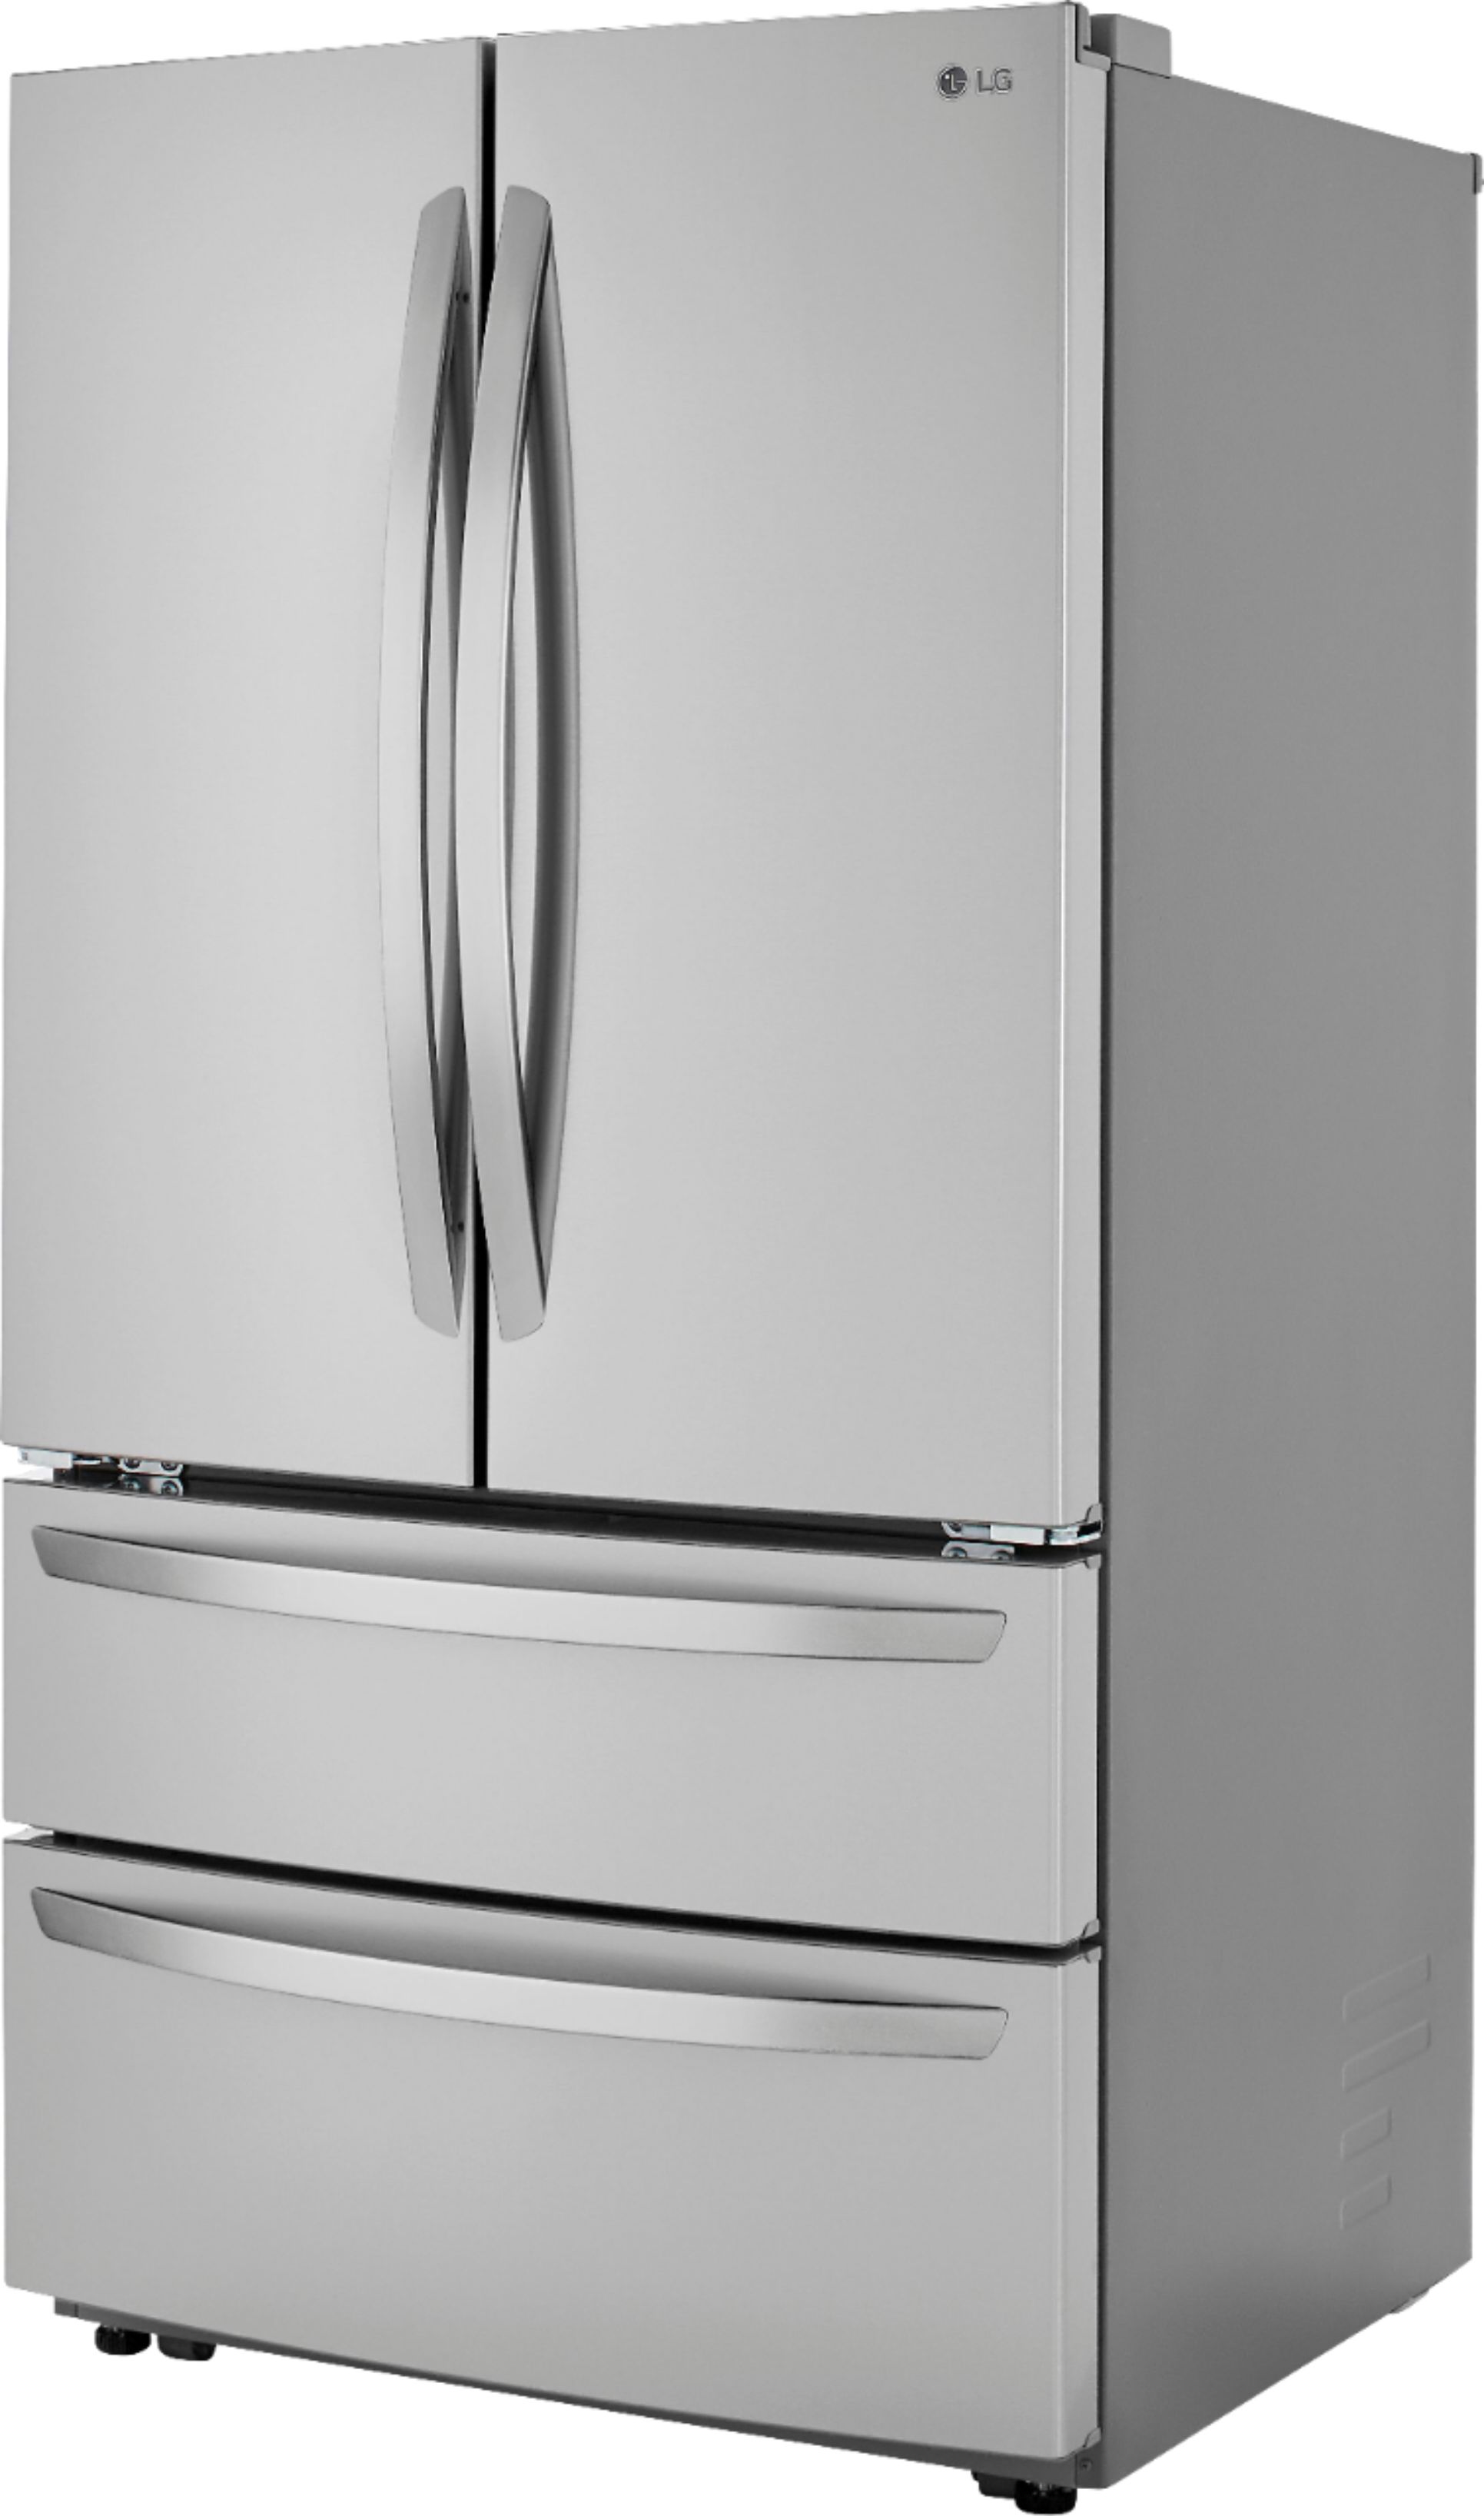 Questions and Answers: LG 26.9 Cu. Ft. 4-Door French Door Refrigerator ...